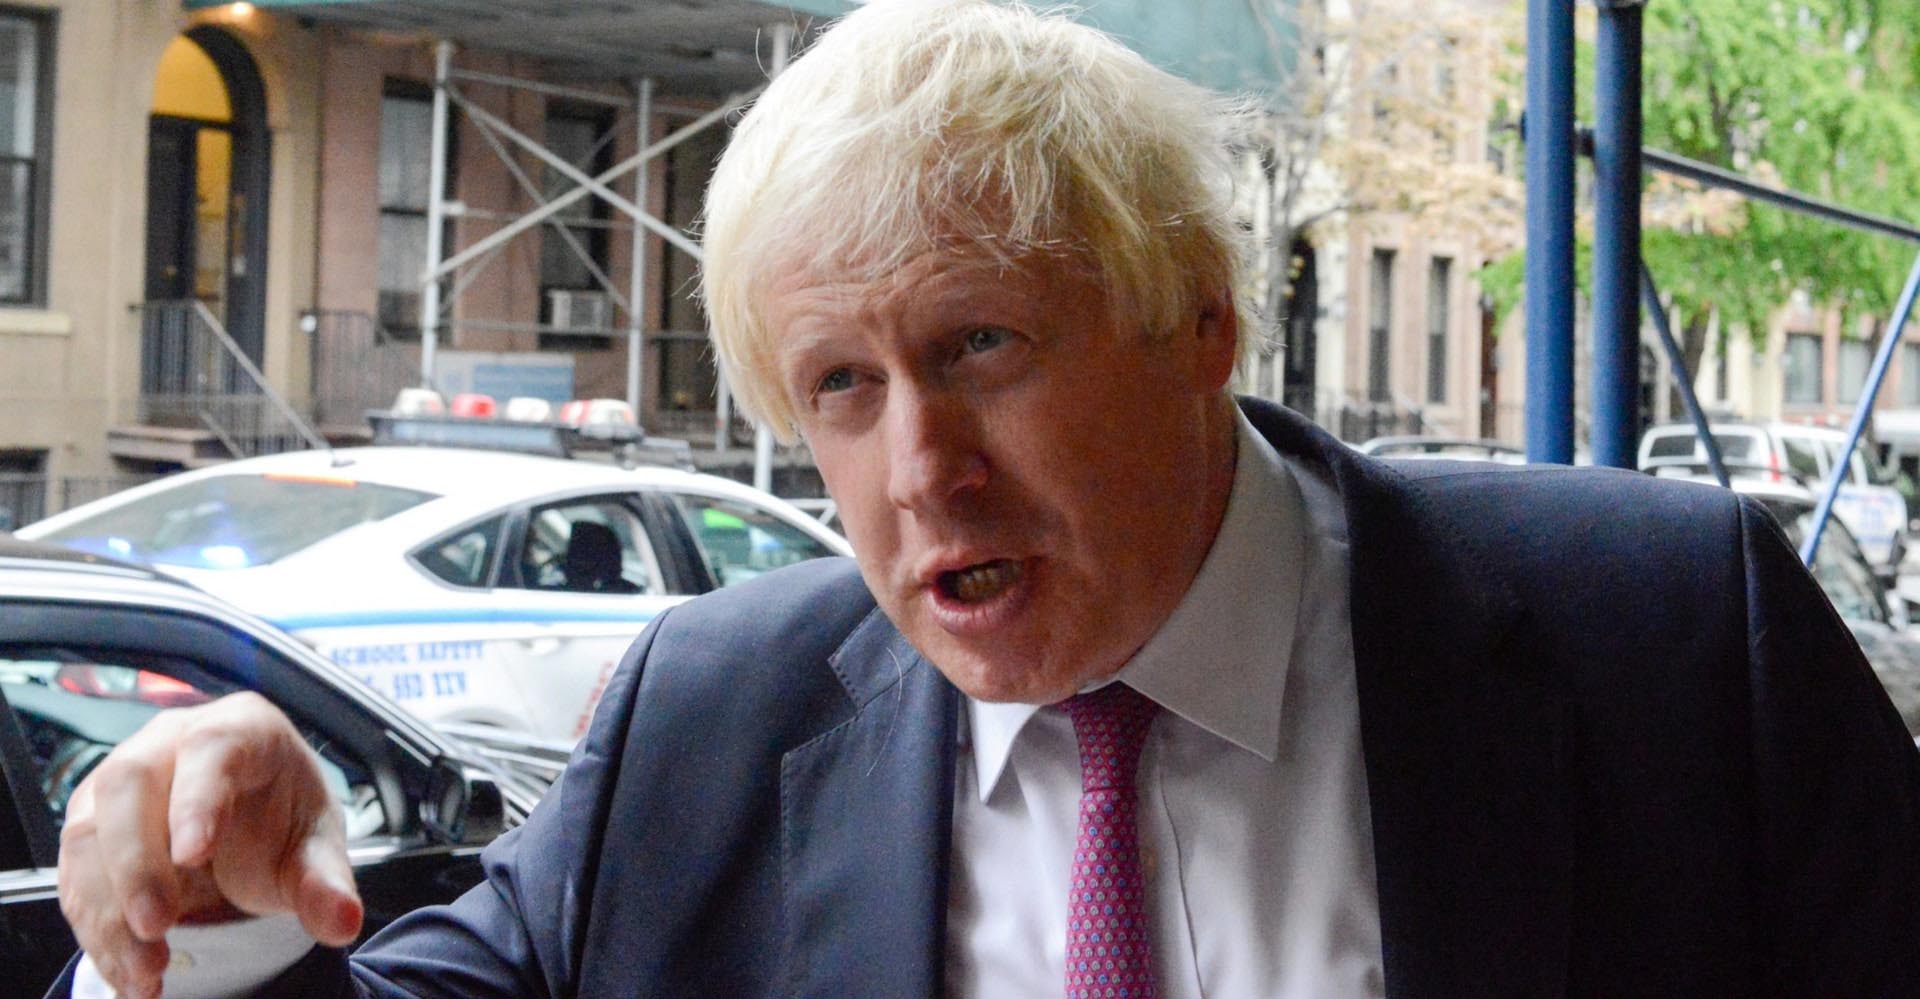 Boris Johnson Threatens To Resign If Theresa May “Goes Against His Brexit Demands”, Pound Rises